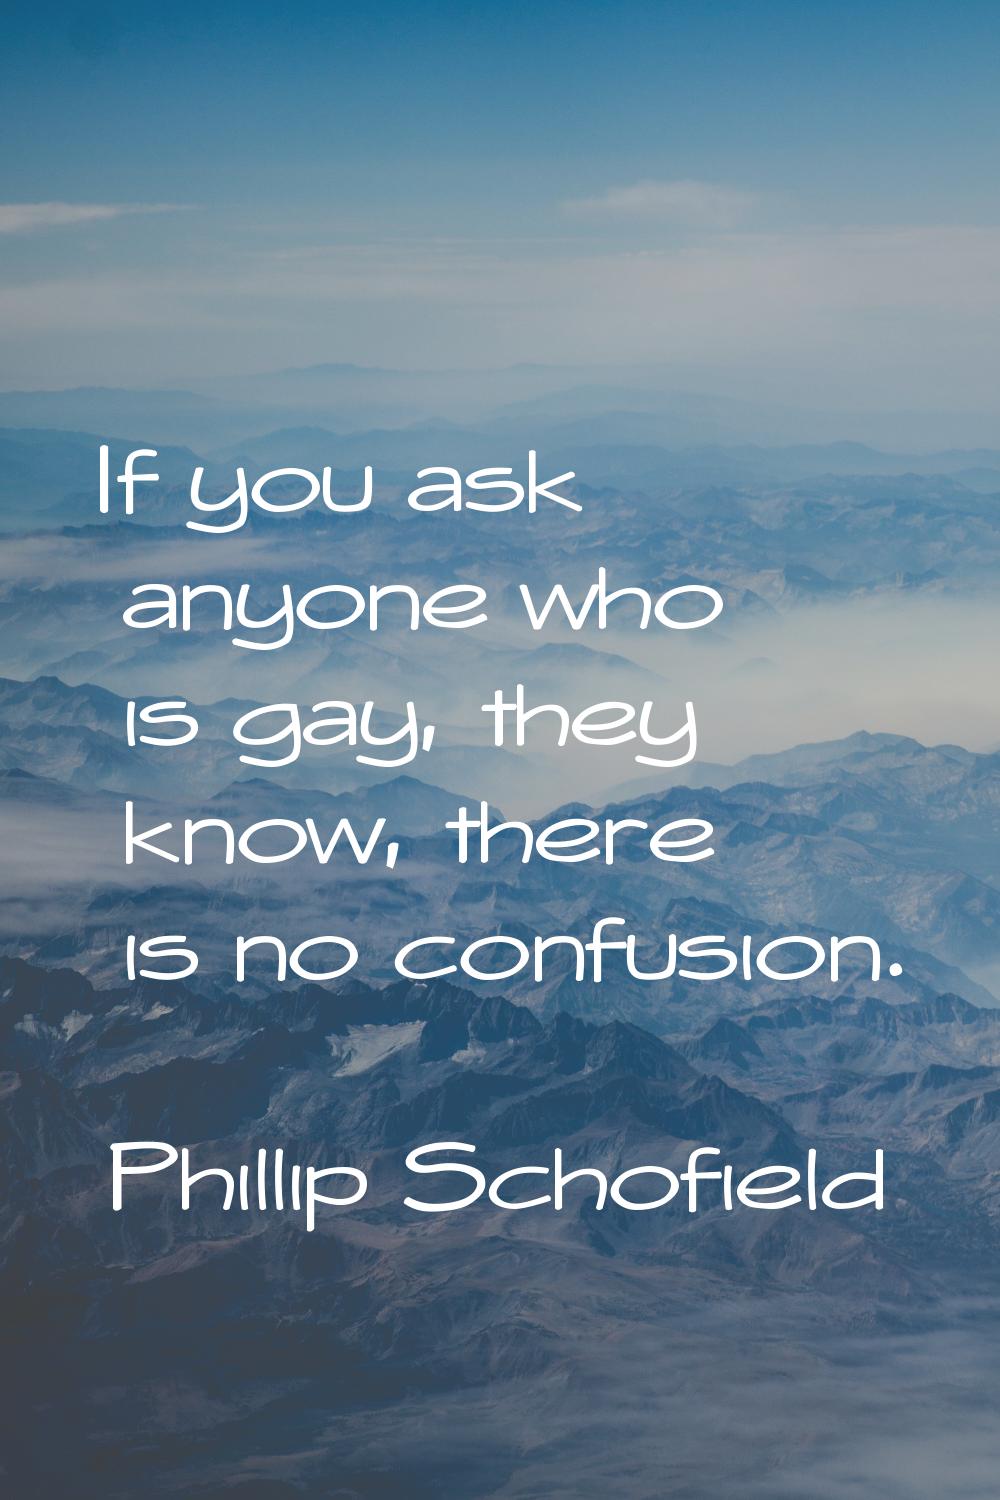 If you ask anyone who is gay, they know, there is no confusion.